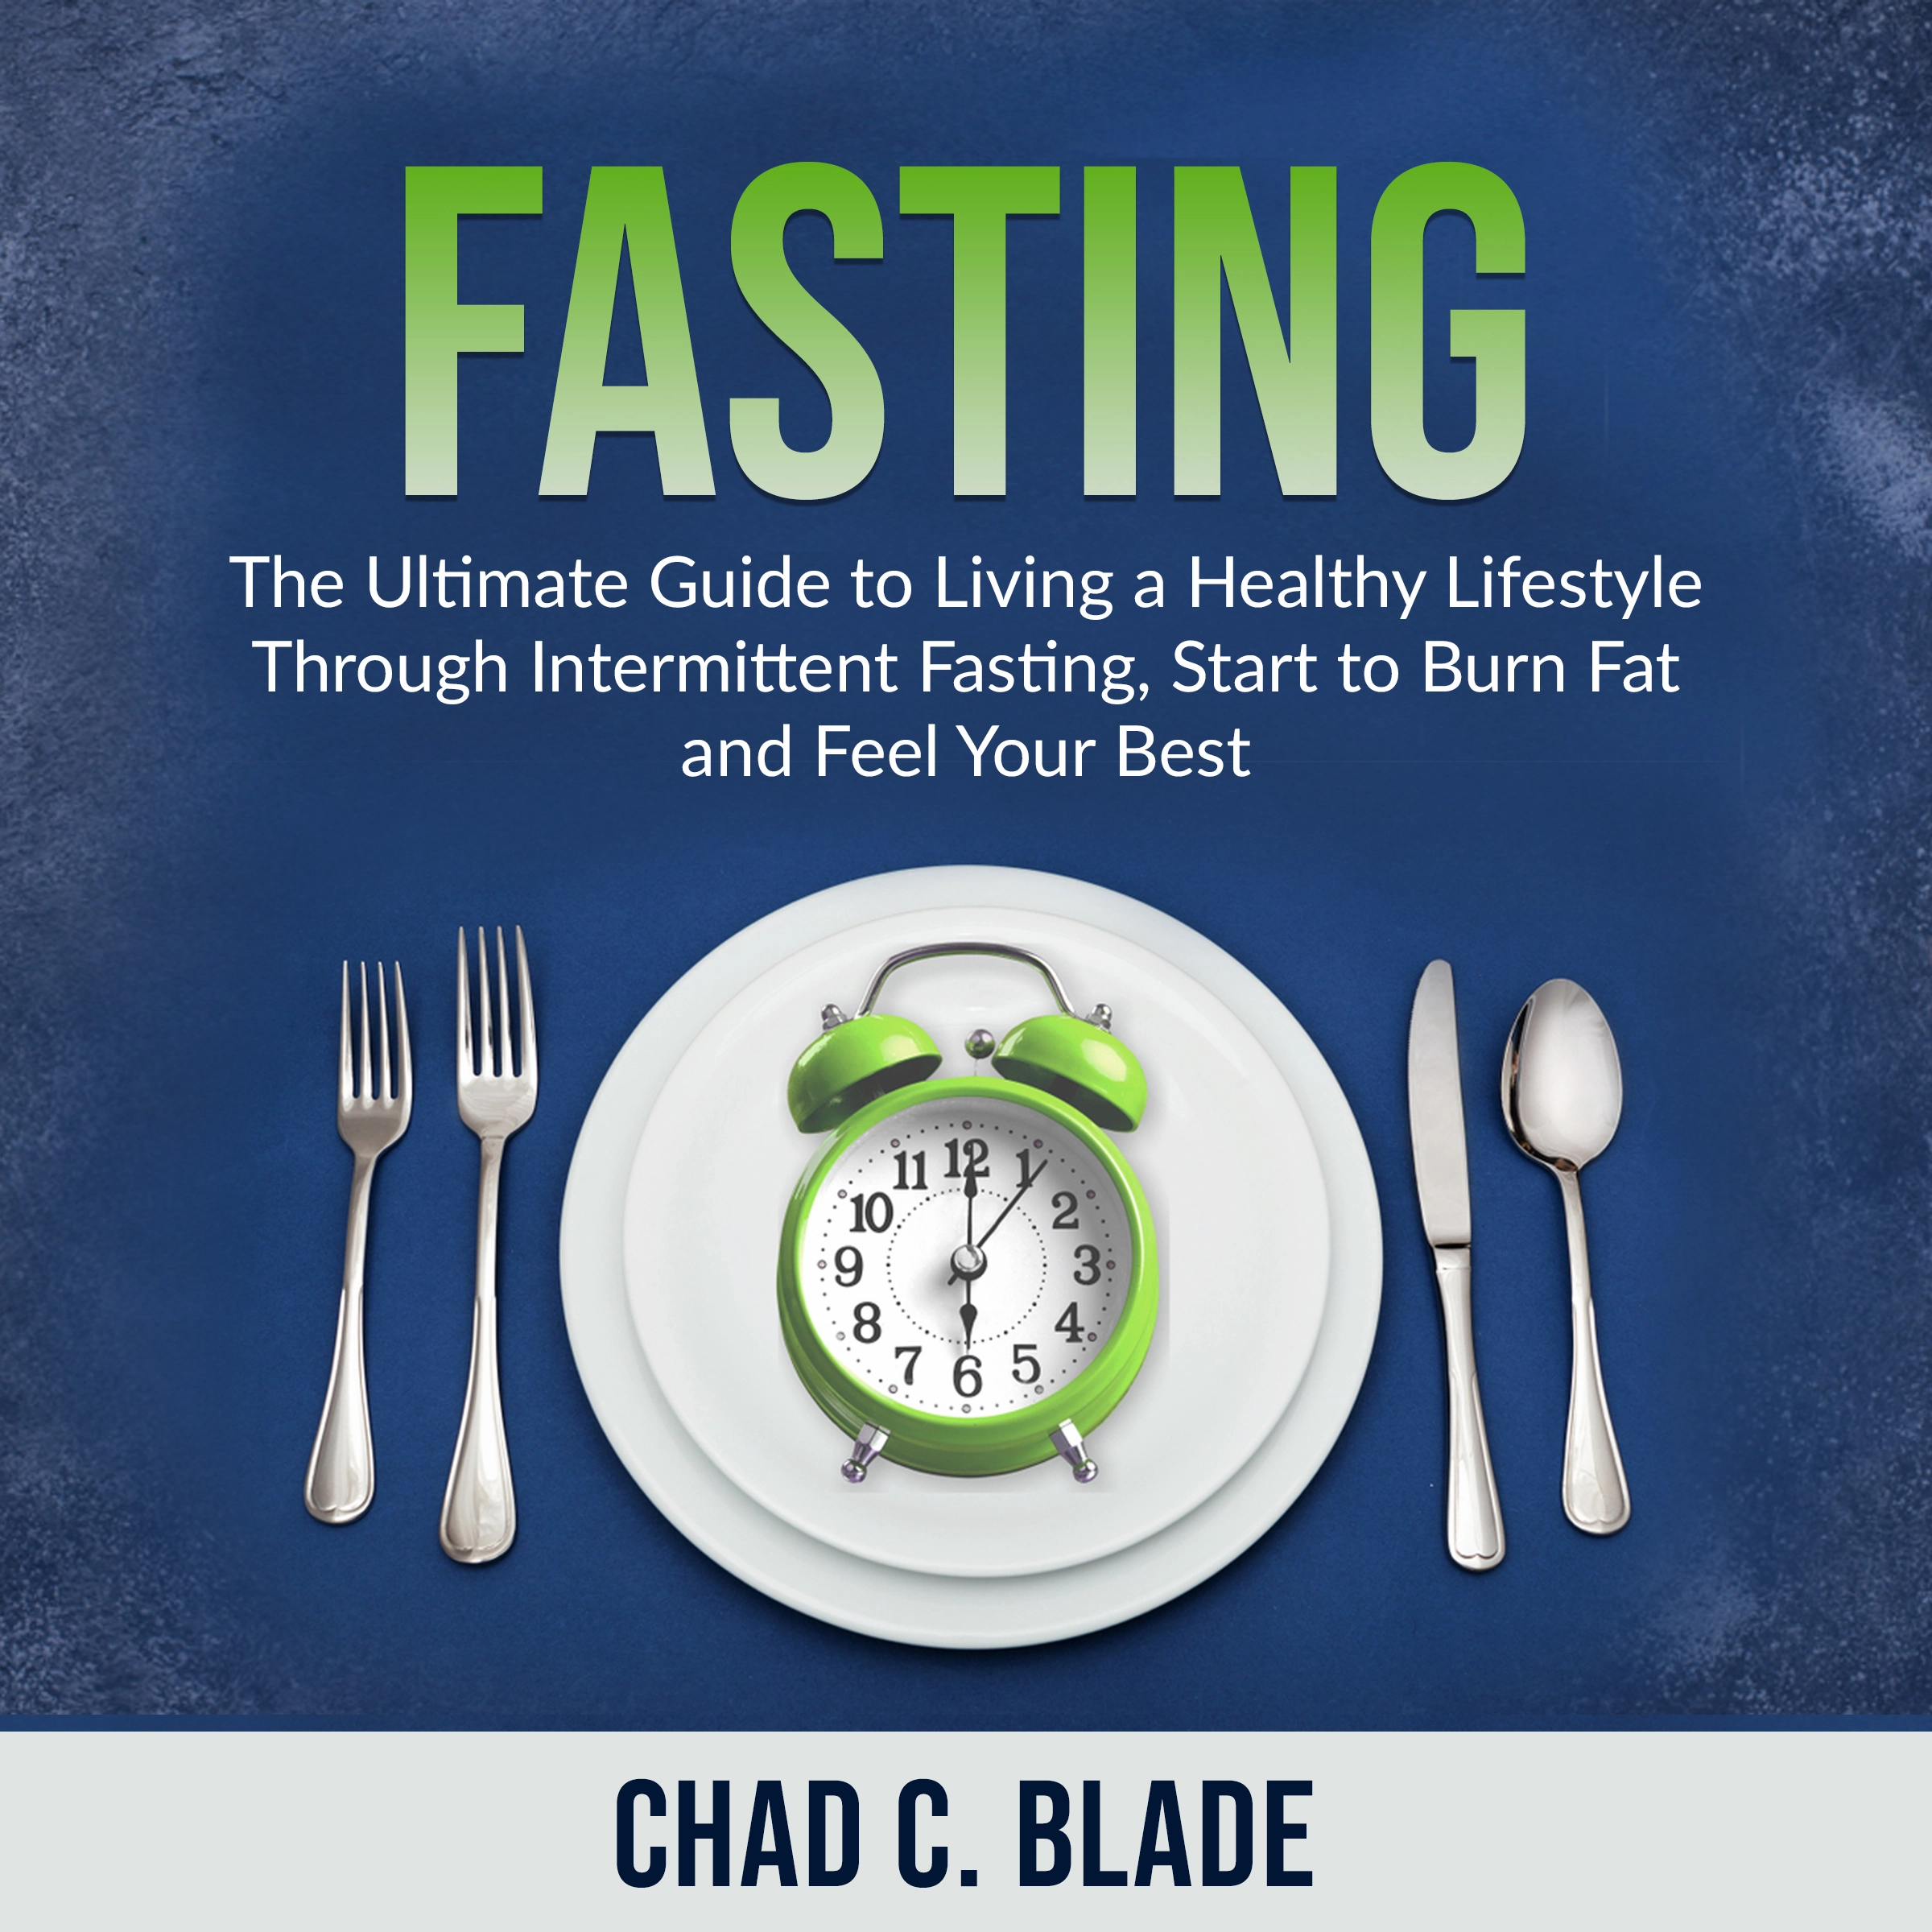 Fasting: The Ultimate Guide to Living a Healthy Lifestyle Through Intermittent Fasting, Start to Burn Fat and Feel Your Best Audiobook by Chad C. Blade